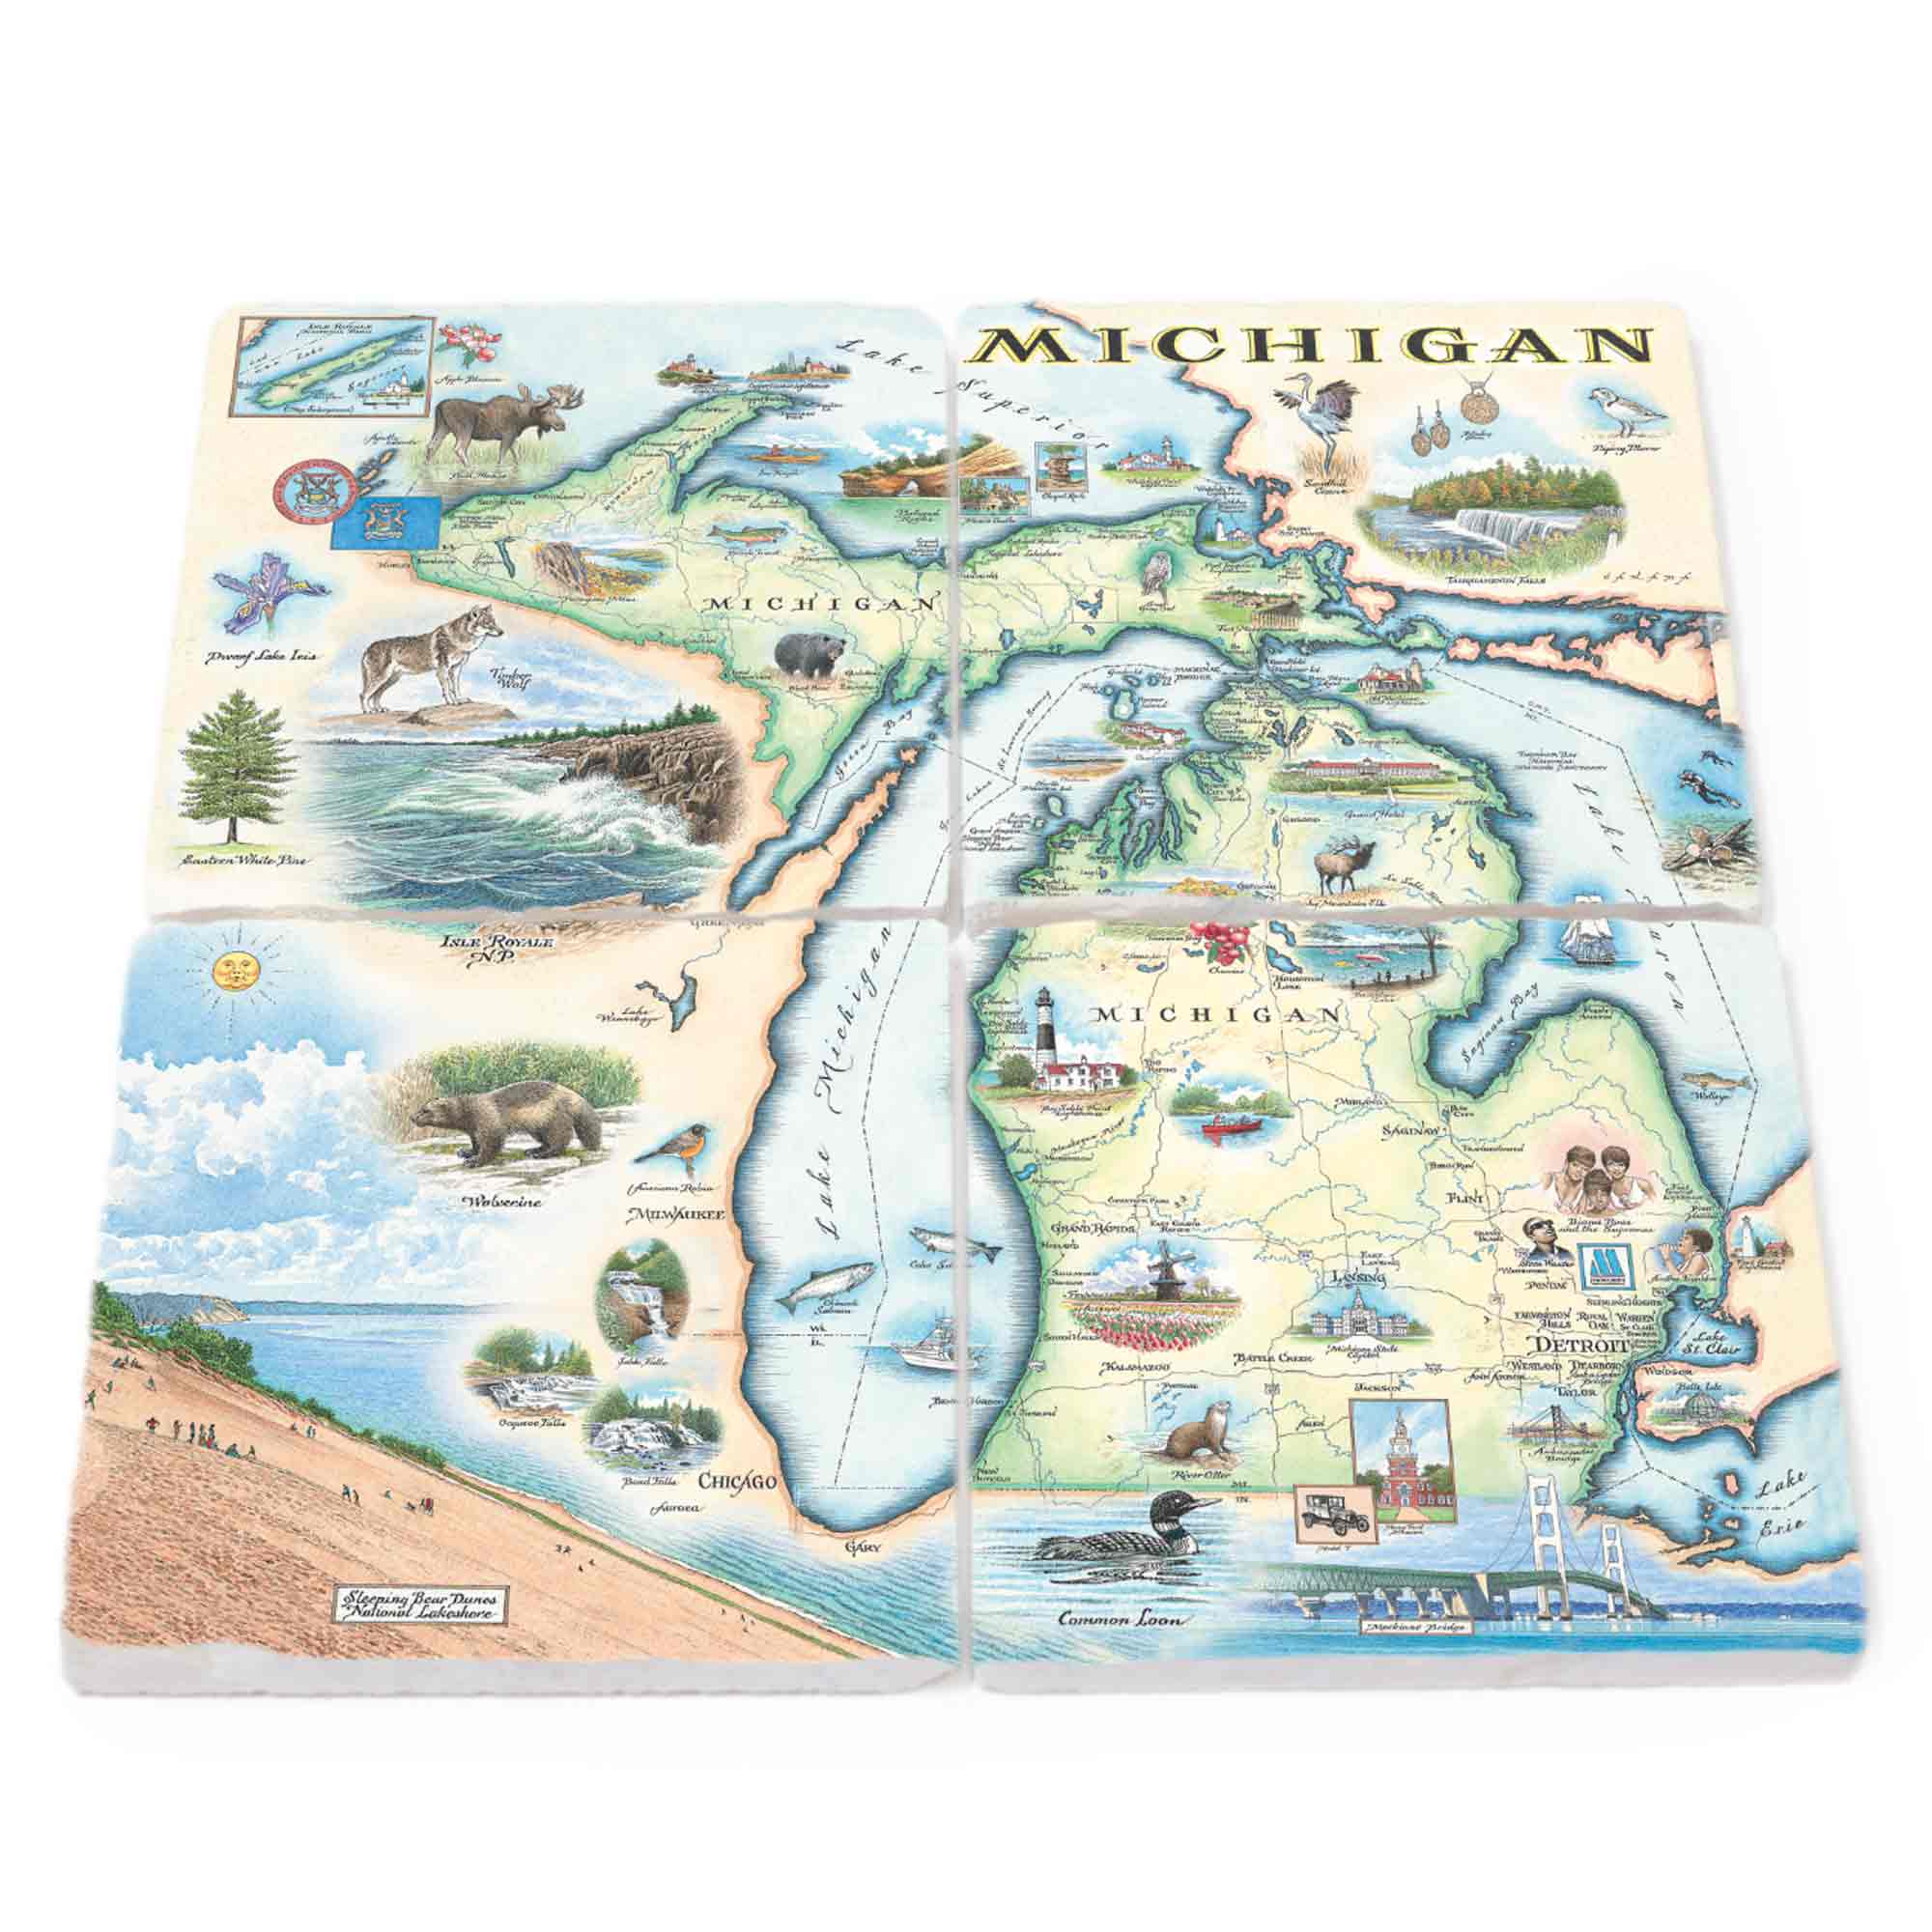 Michigan State Map Stone Coaster Set of 4. Showcasing the Great Lakes, Detroit, Ann Arbor, Grand Rapids, and Lansing. The design includes depictions of nature, wildlife such as ducks, deer, fish, moose, iconic lighthouses, the Michigan wolverines, and the majestic Mackinac Bridge